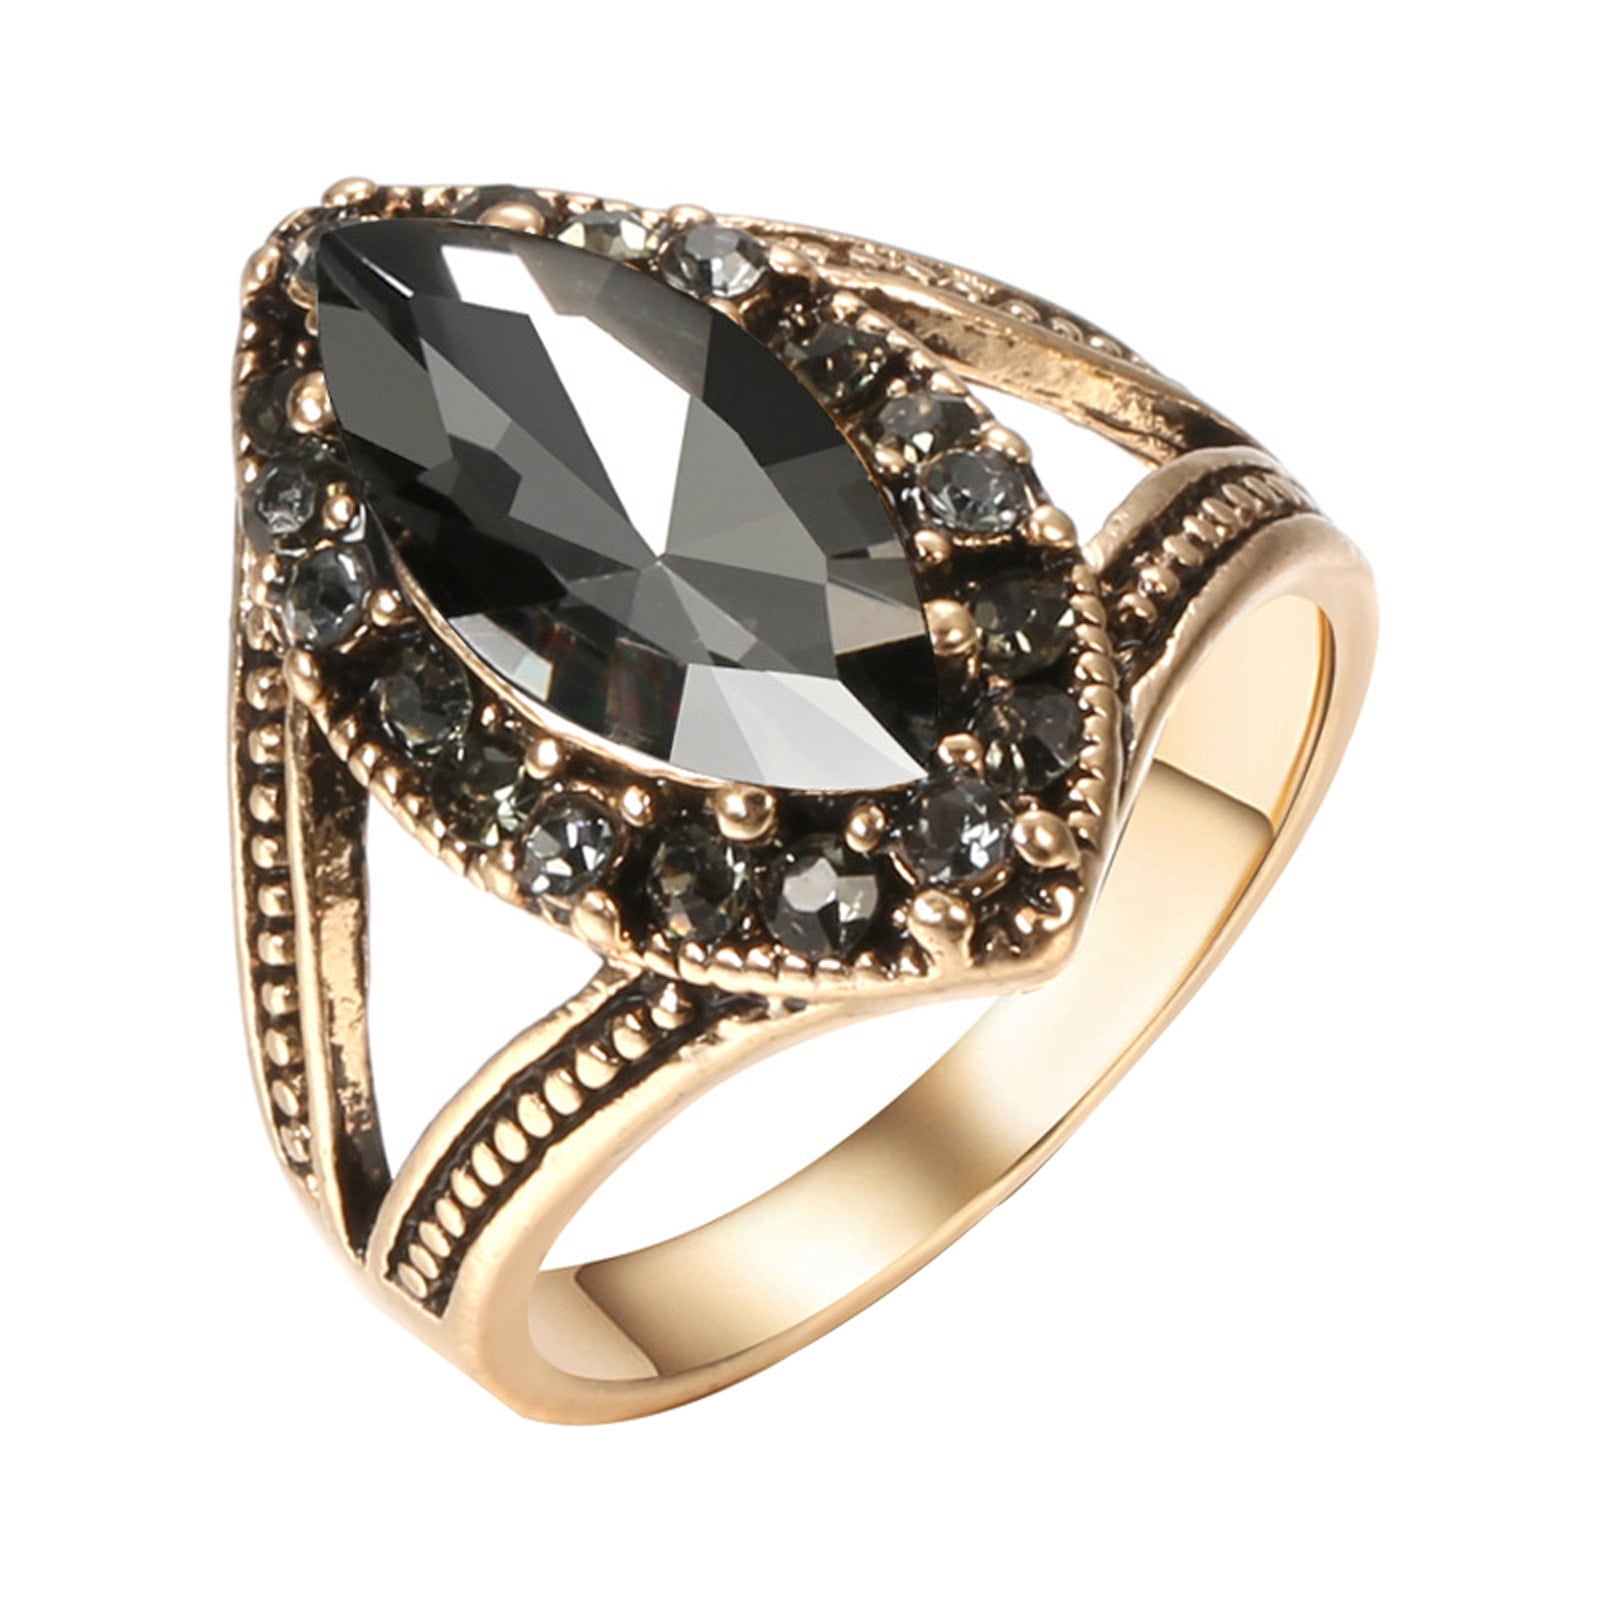 How-To Pick The Ring Of Her Dreams | Blog | Don Roberto Jewelers